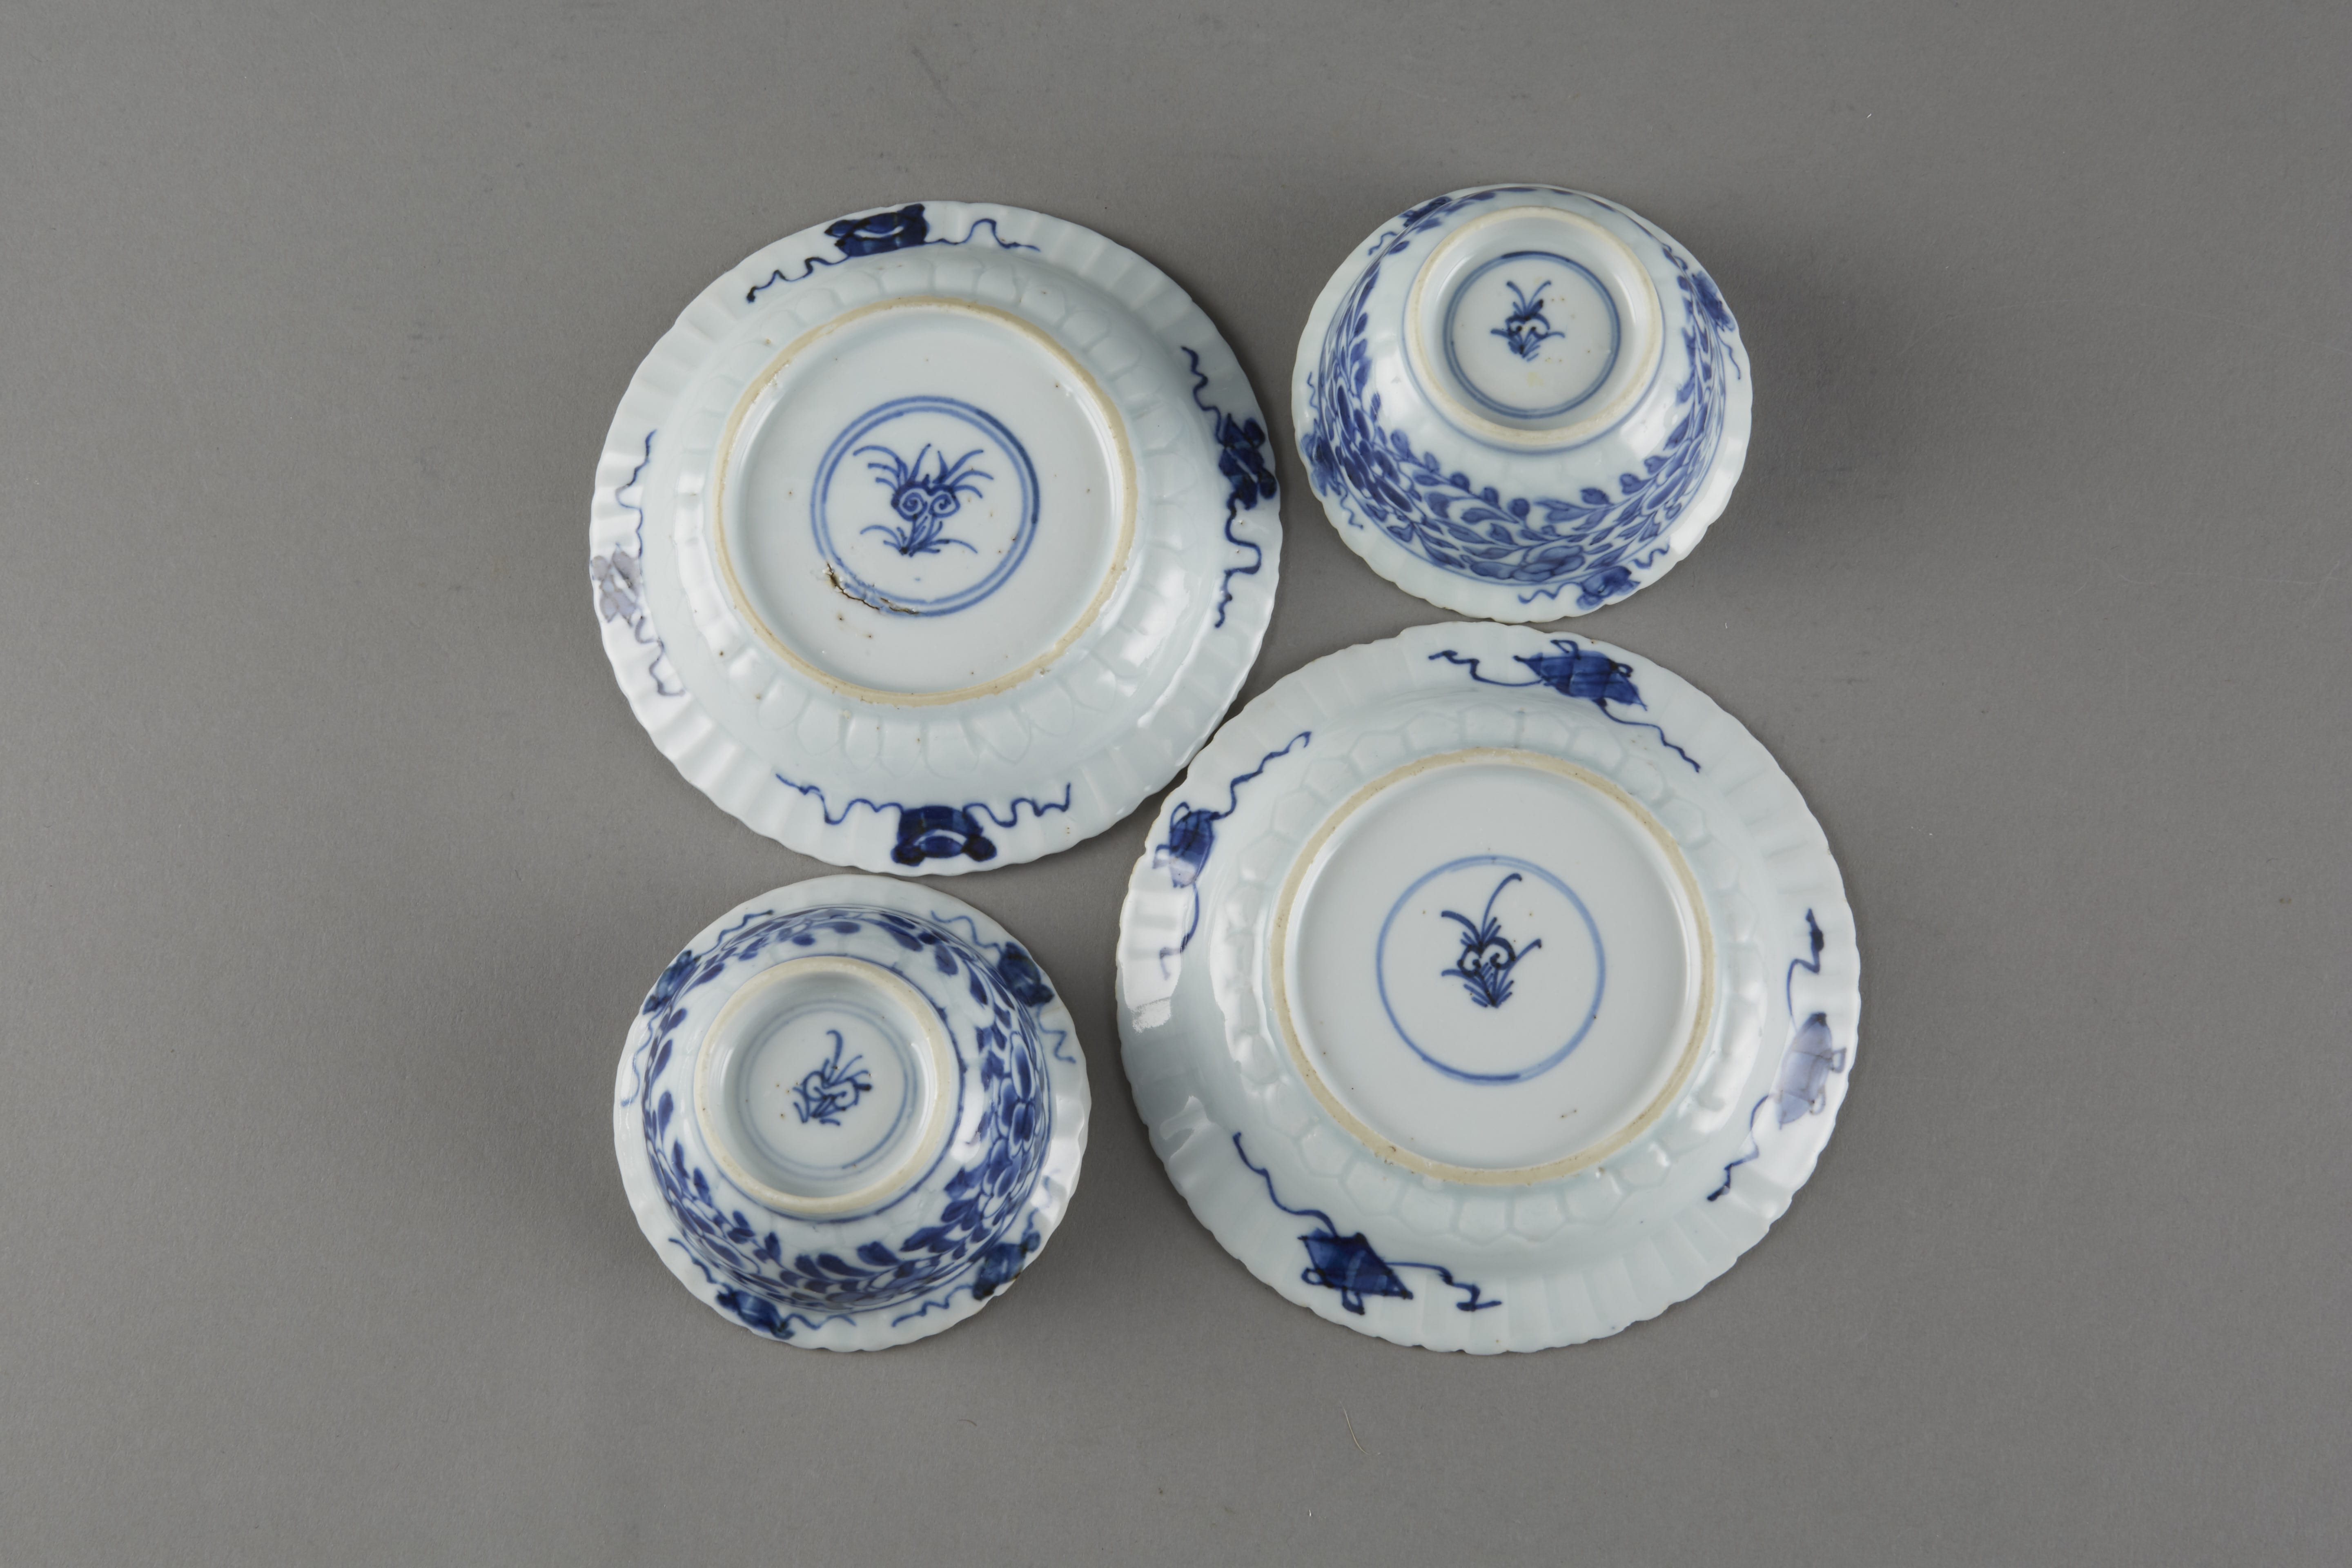 Lot 086: Chinese 18th Century Kangxi Blue and White Export Porcelain Pair of Cups and Saucers with Mark on Bottom